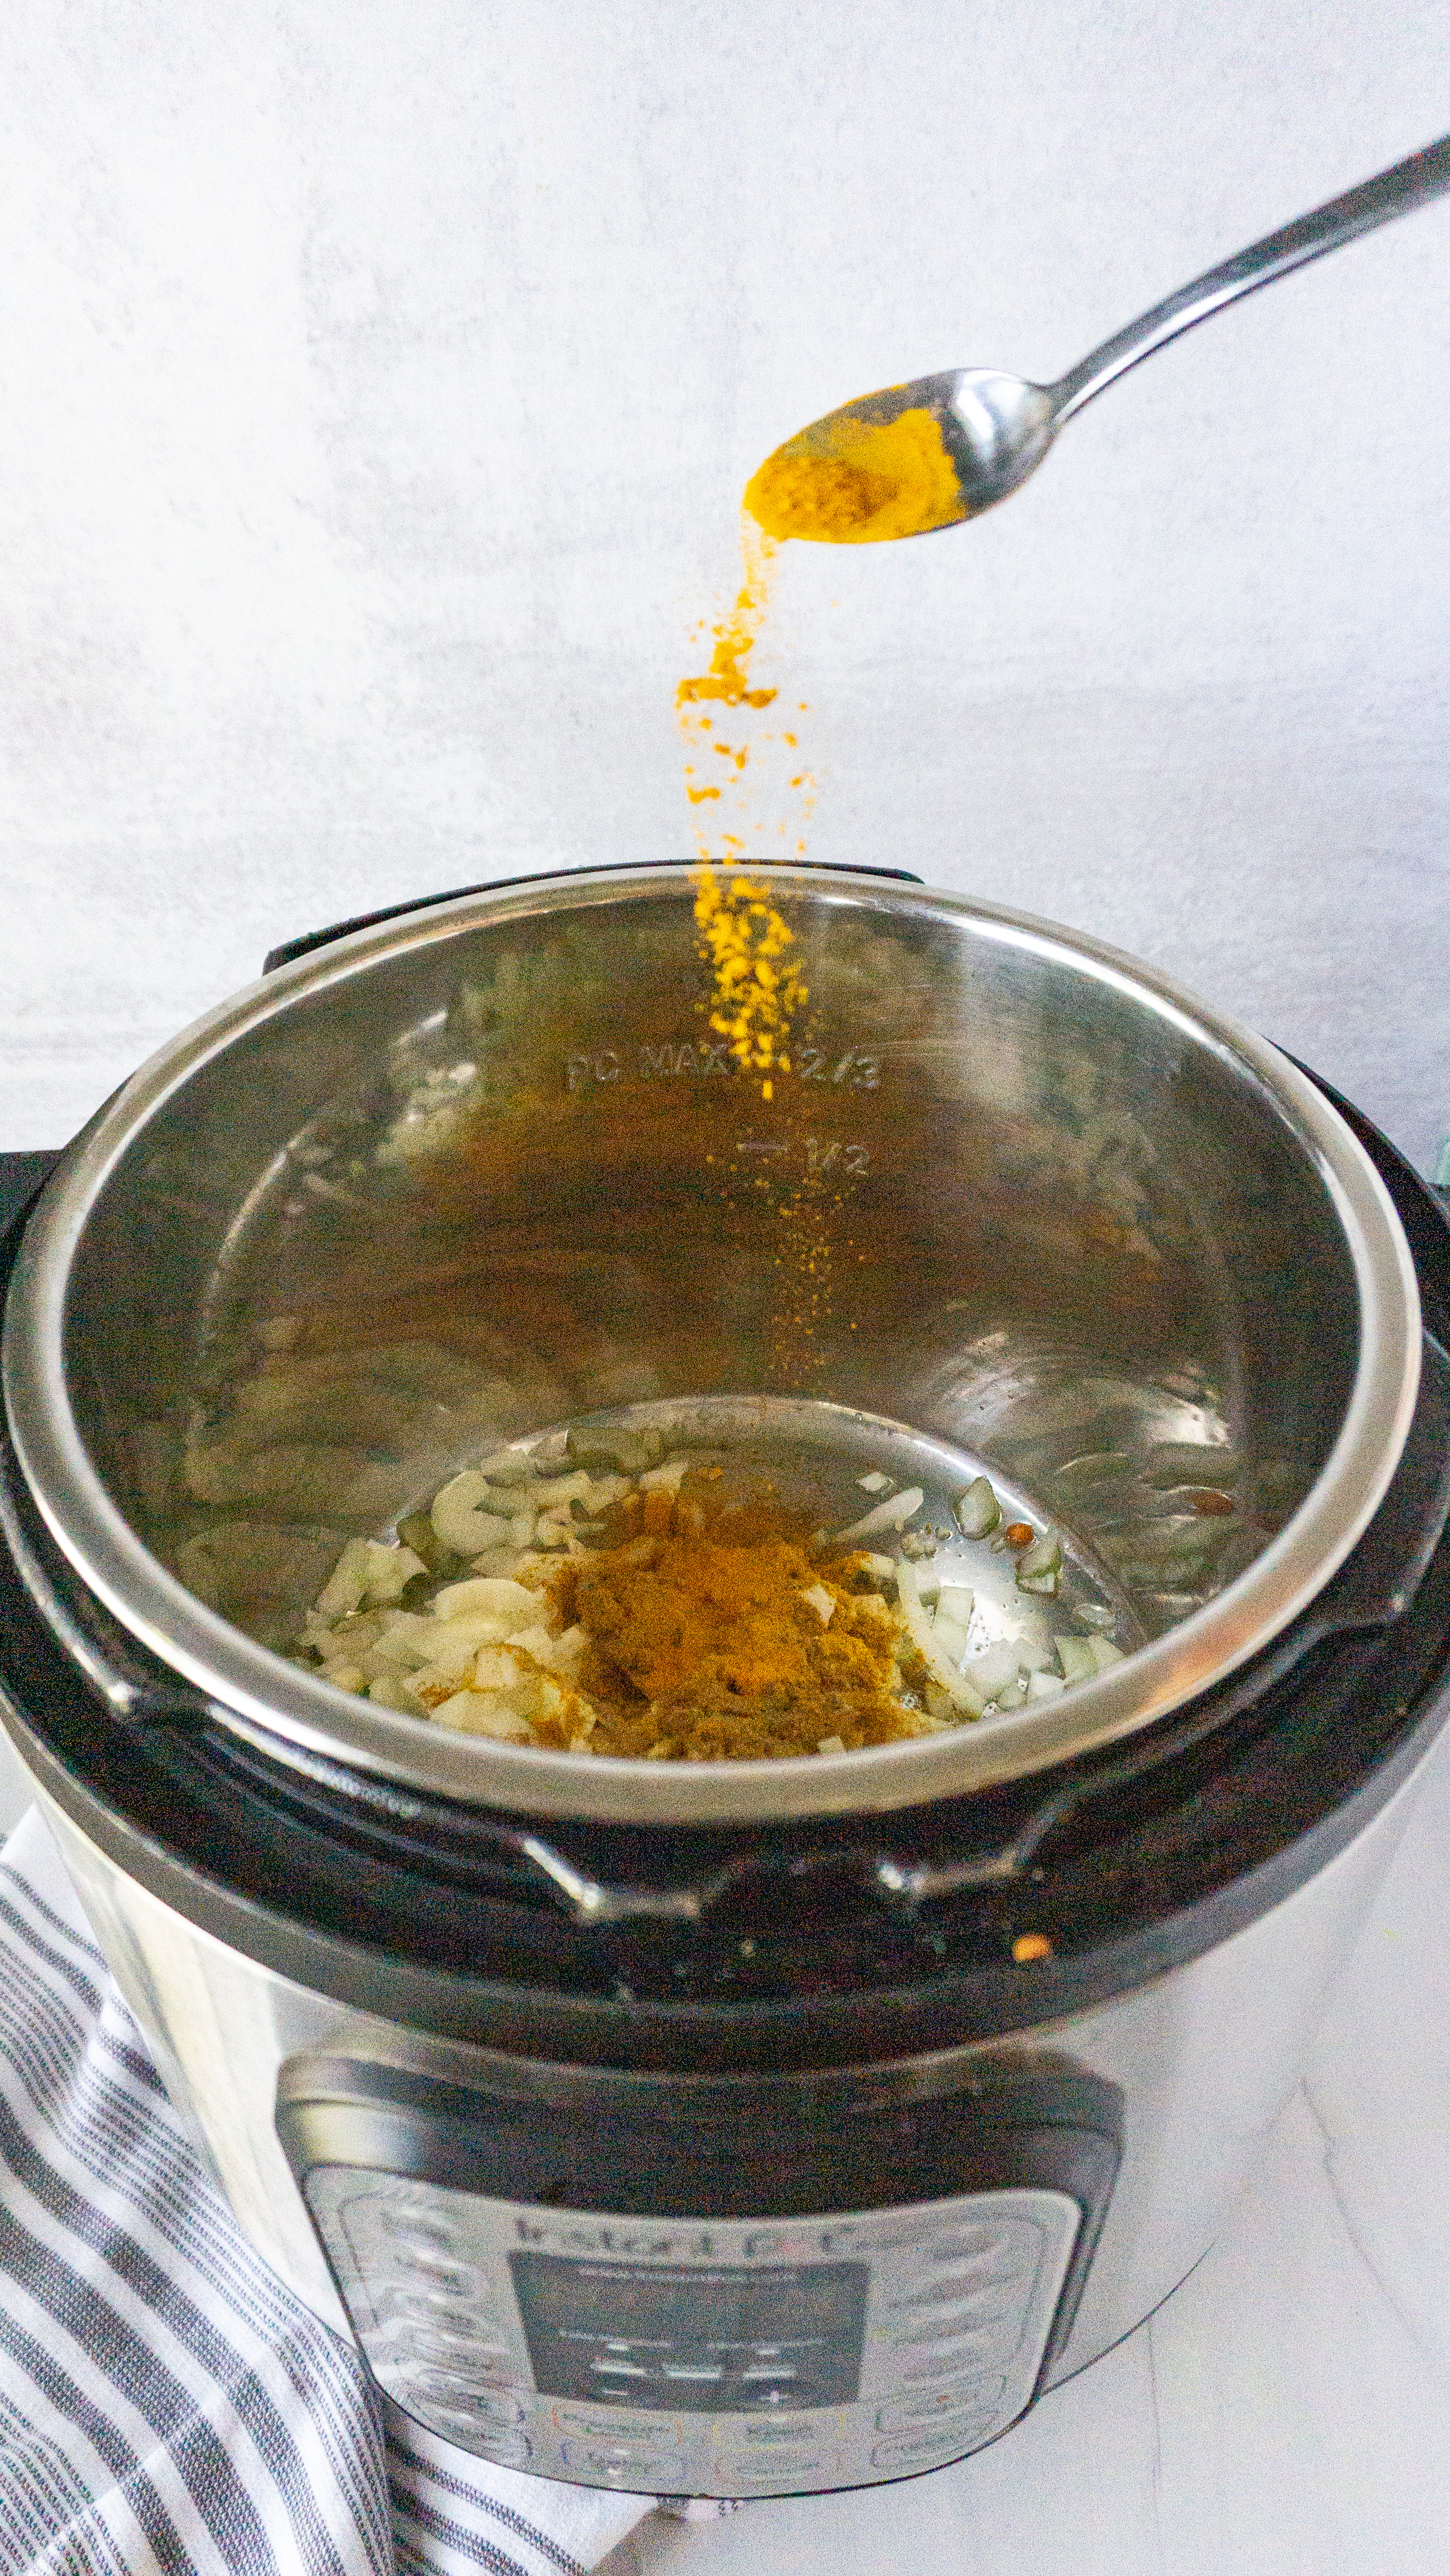 turmeric being poured into instant pot for lentil curry